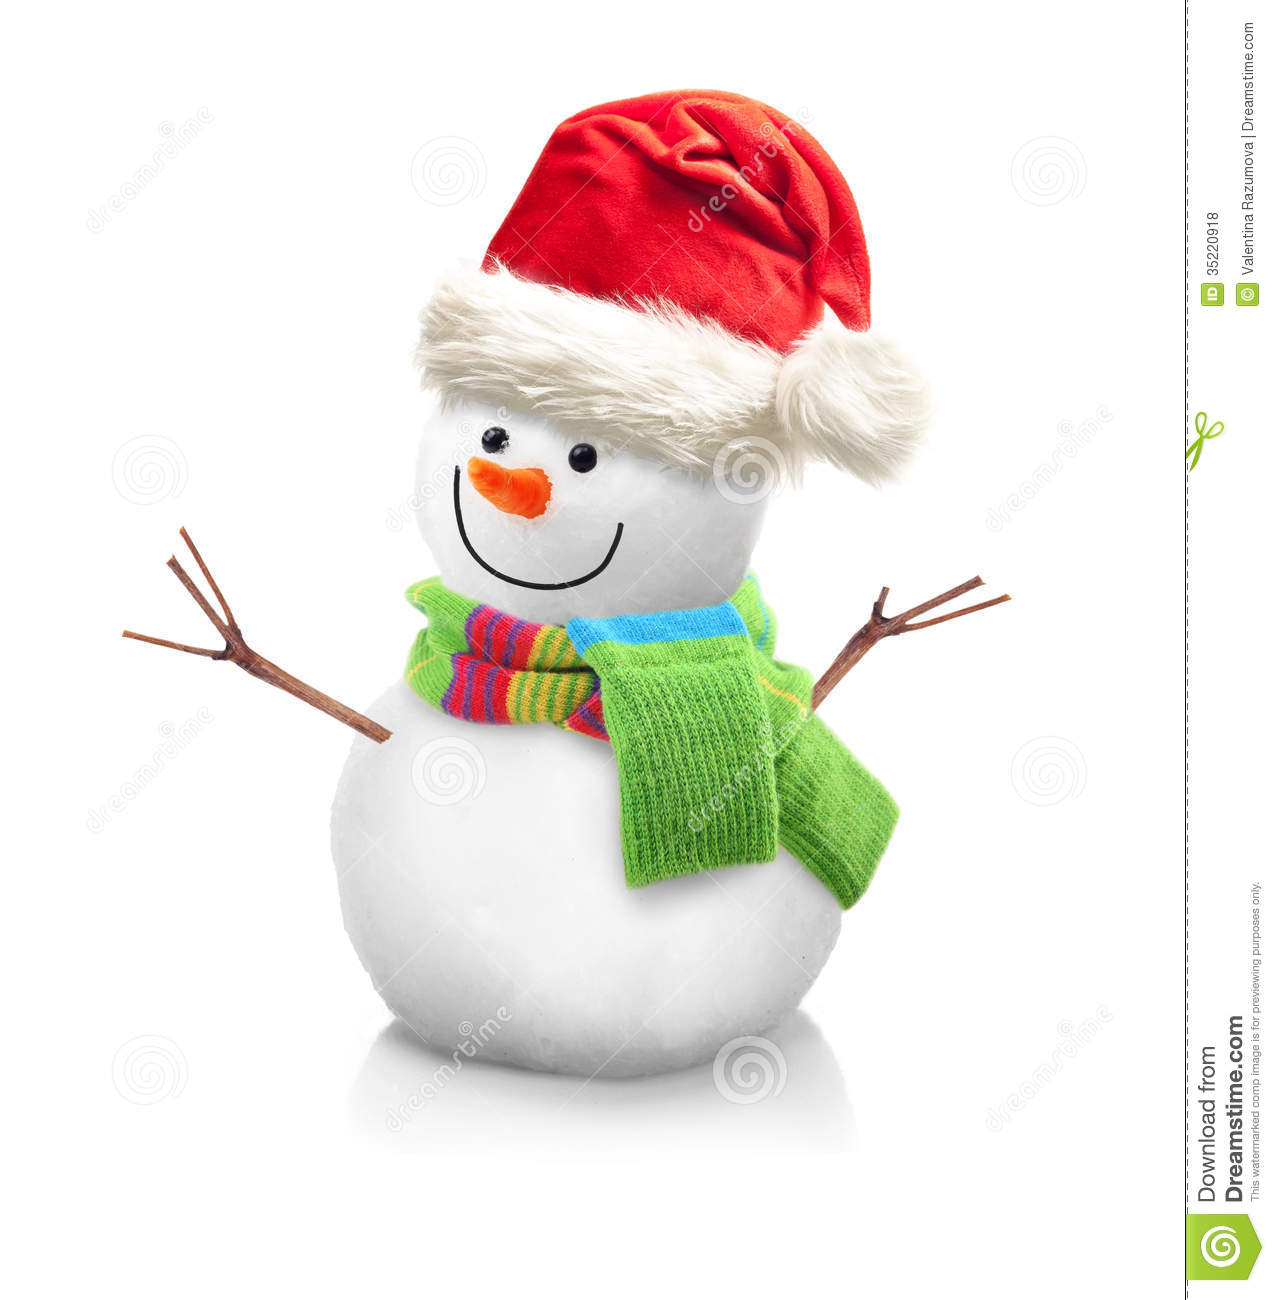 Claus Xmas Red Hat Isolated On White Background Mr No Pr No 3 916 5